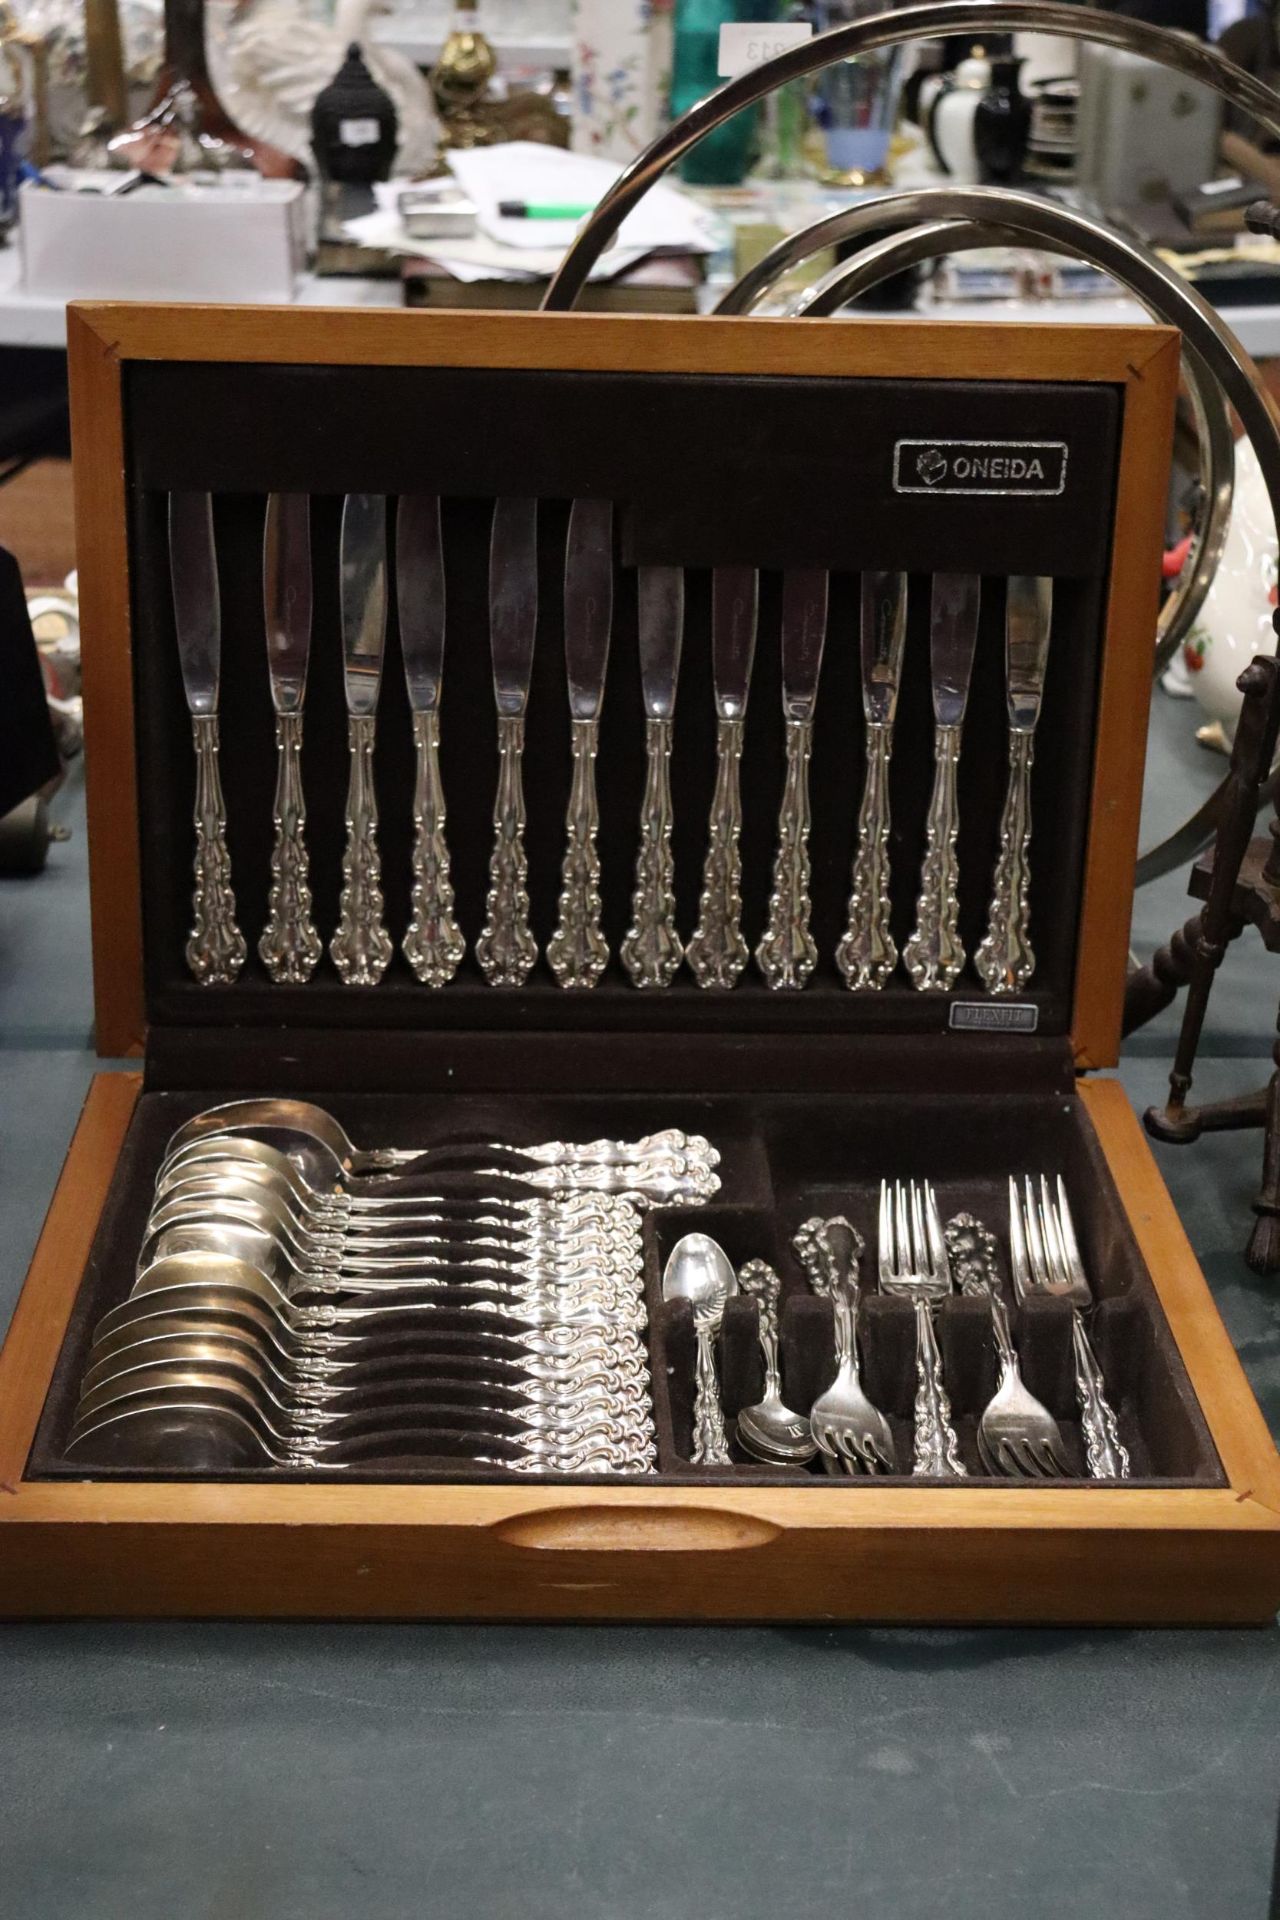 AN ONEIDA CASED CANTEEN OF CUTLERY - Image 7 of 7